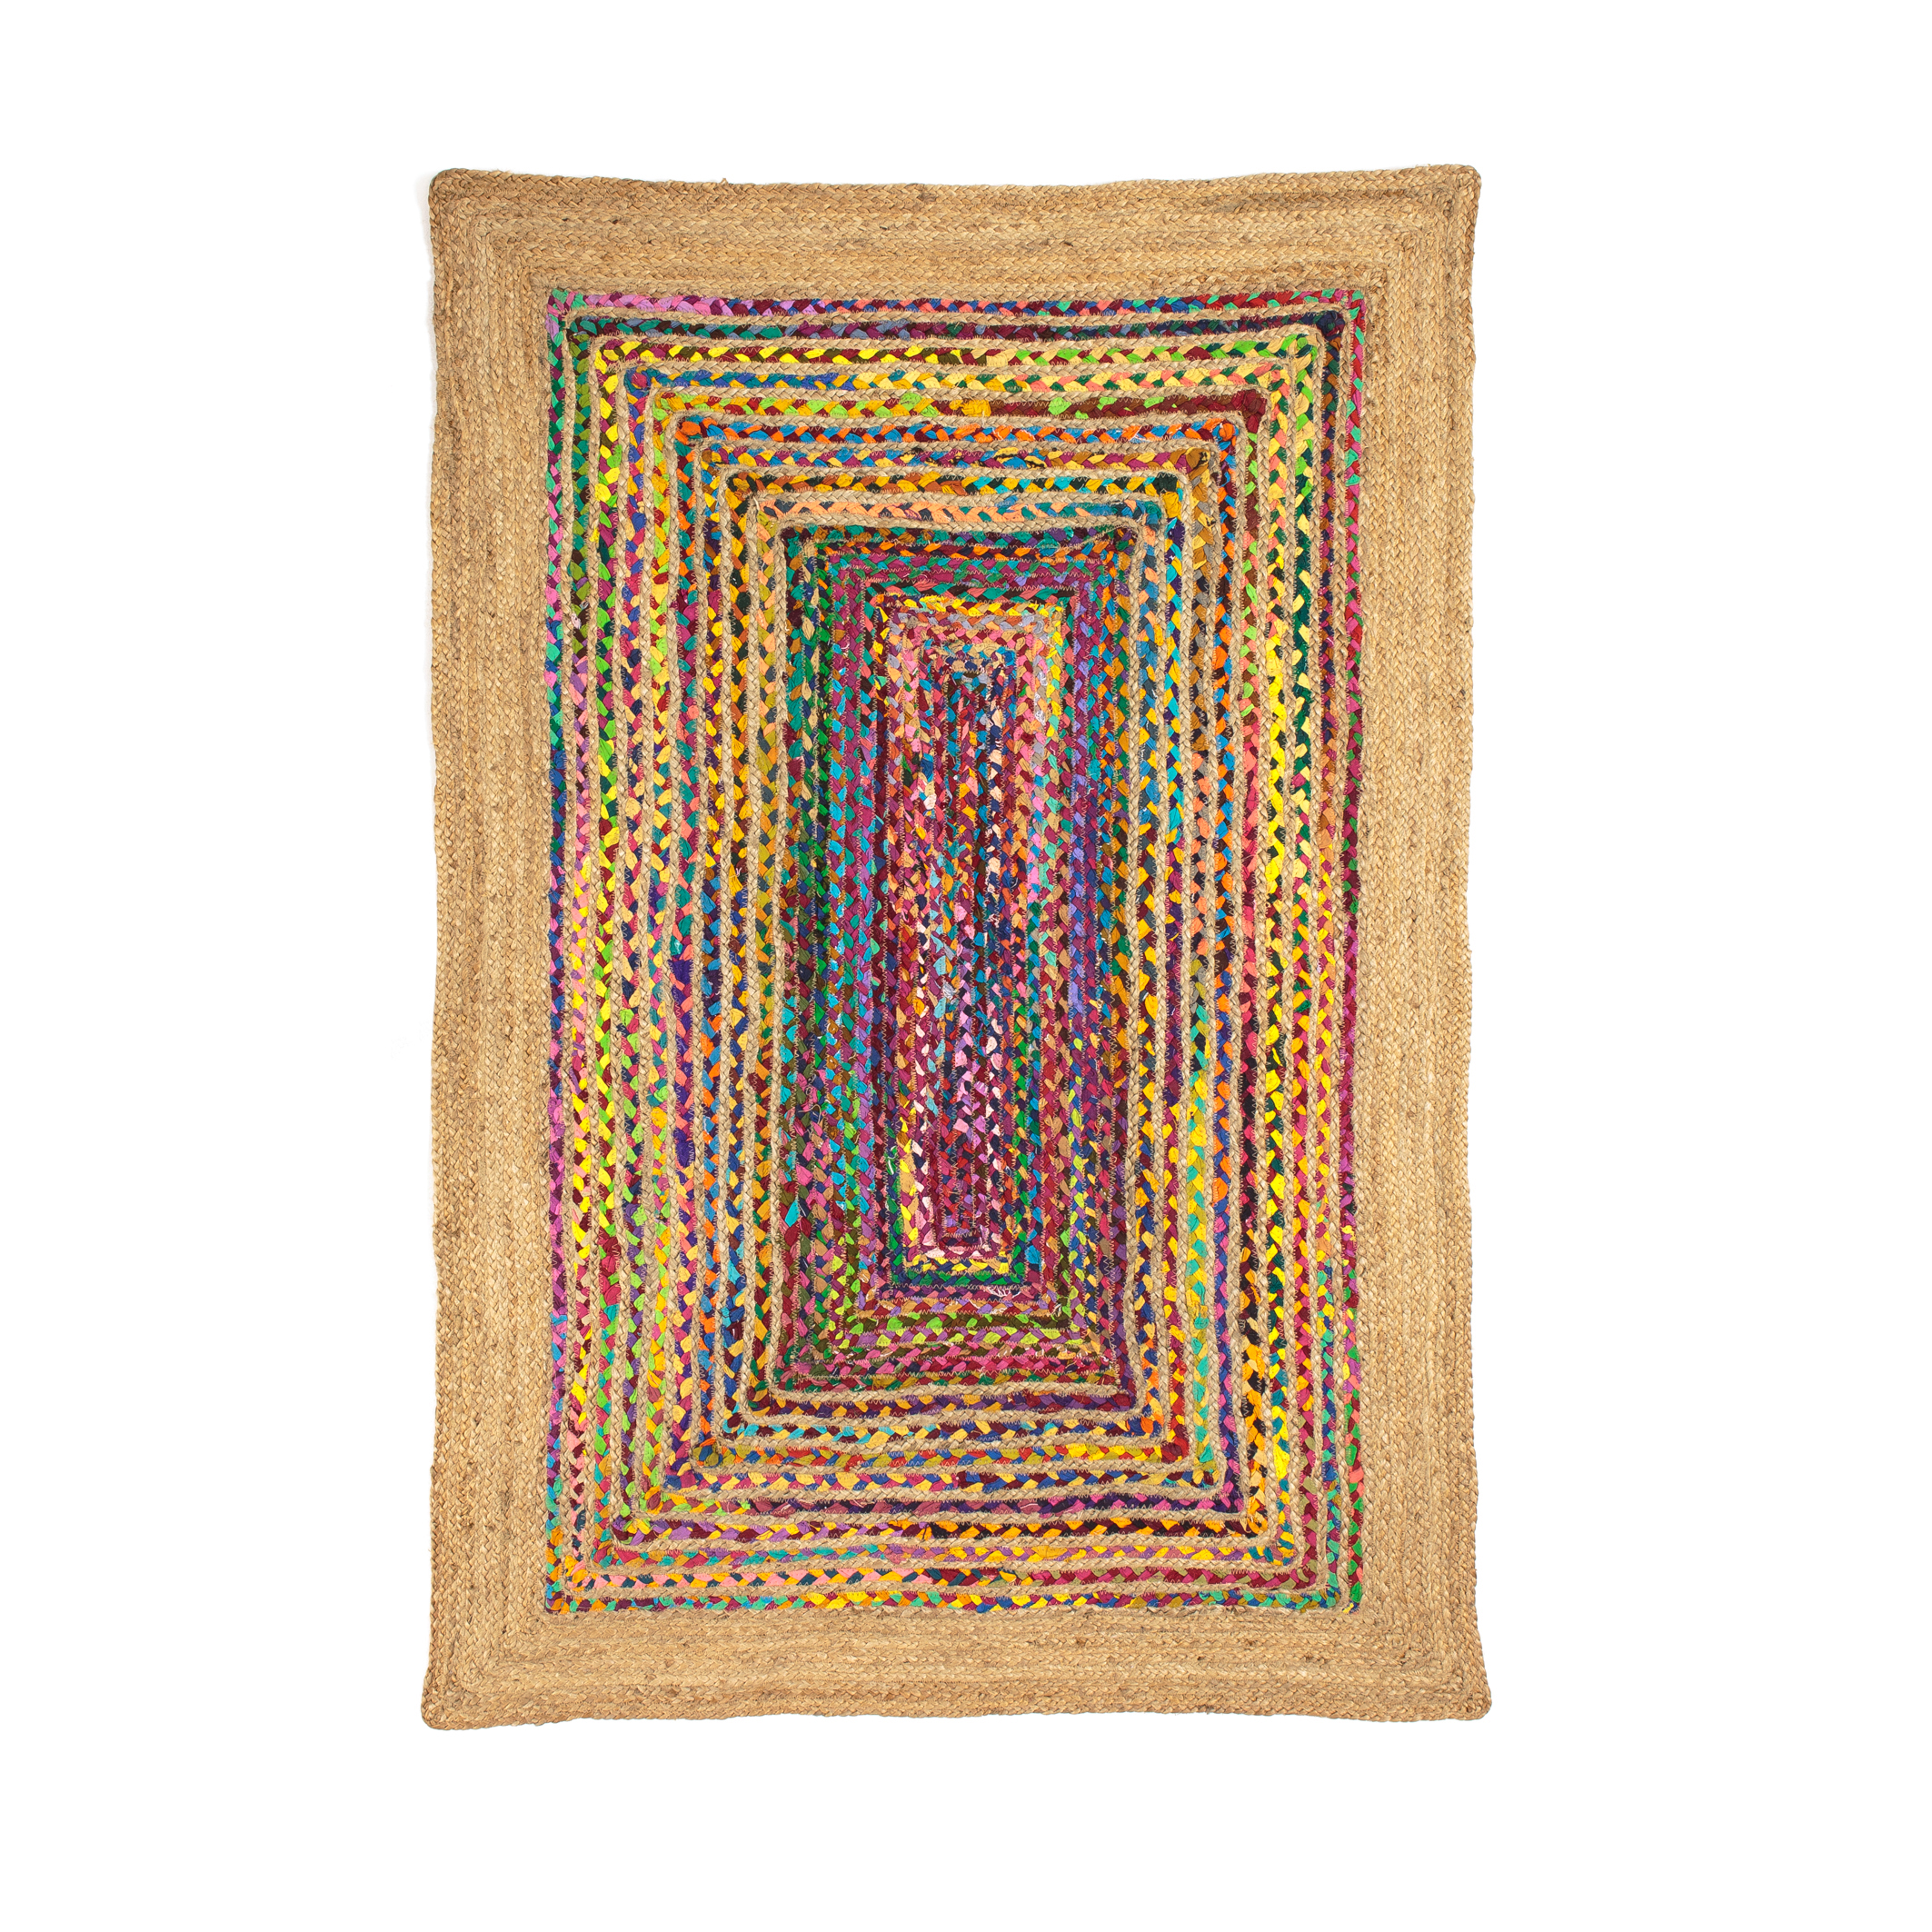 Jaco Rug With Jute And Multicolour, Jute Rug 5×8